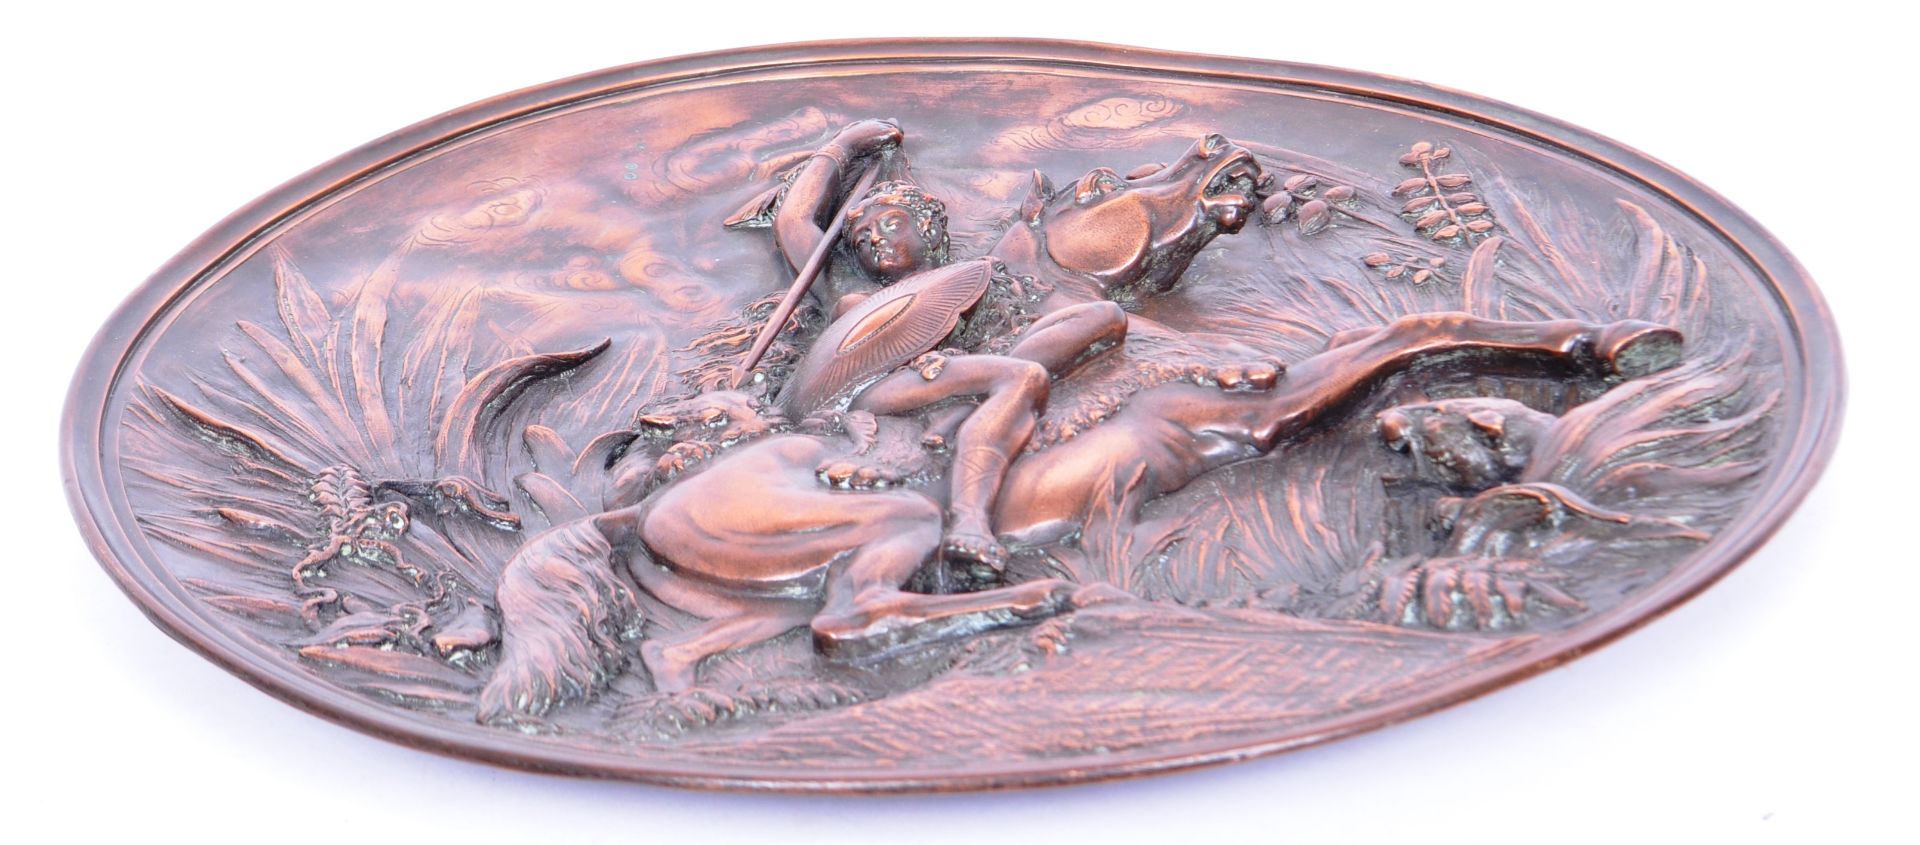 20TH CENTURY BRONZE EMBOSSED WALL PLAQUE OF AN AMAZON ATOP A HORSE - Image 6 of 6